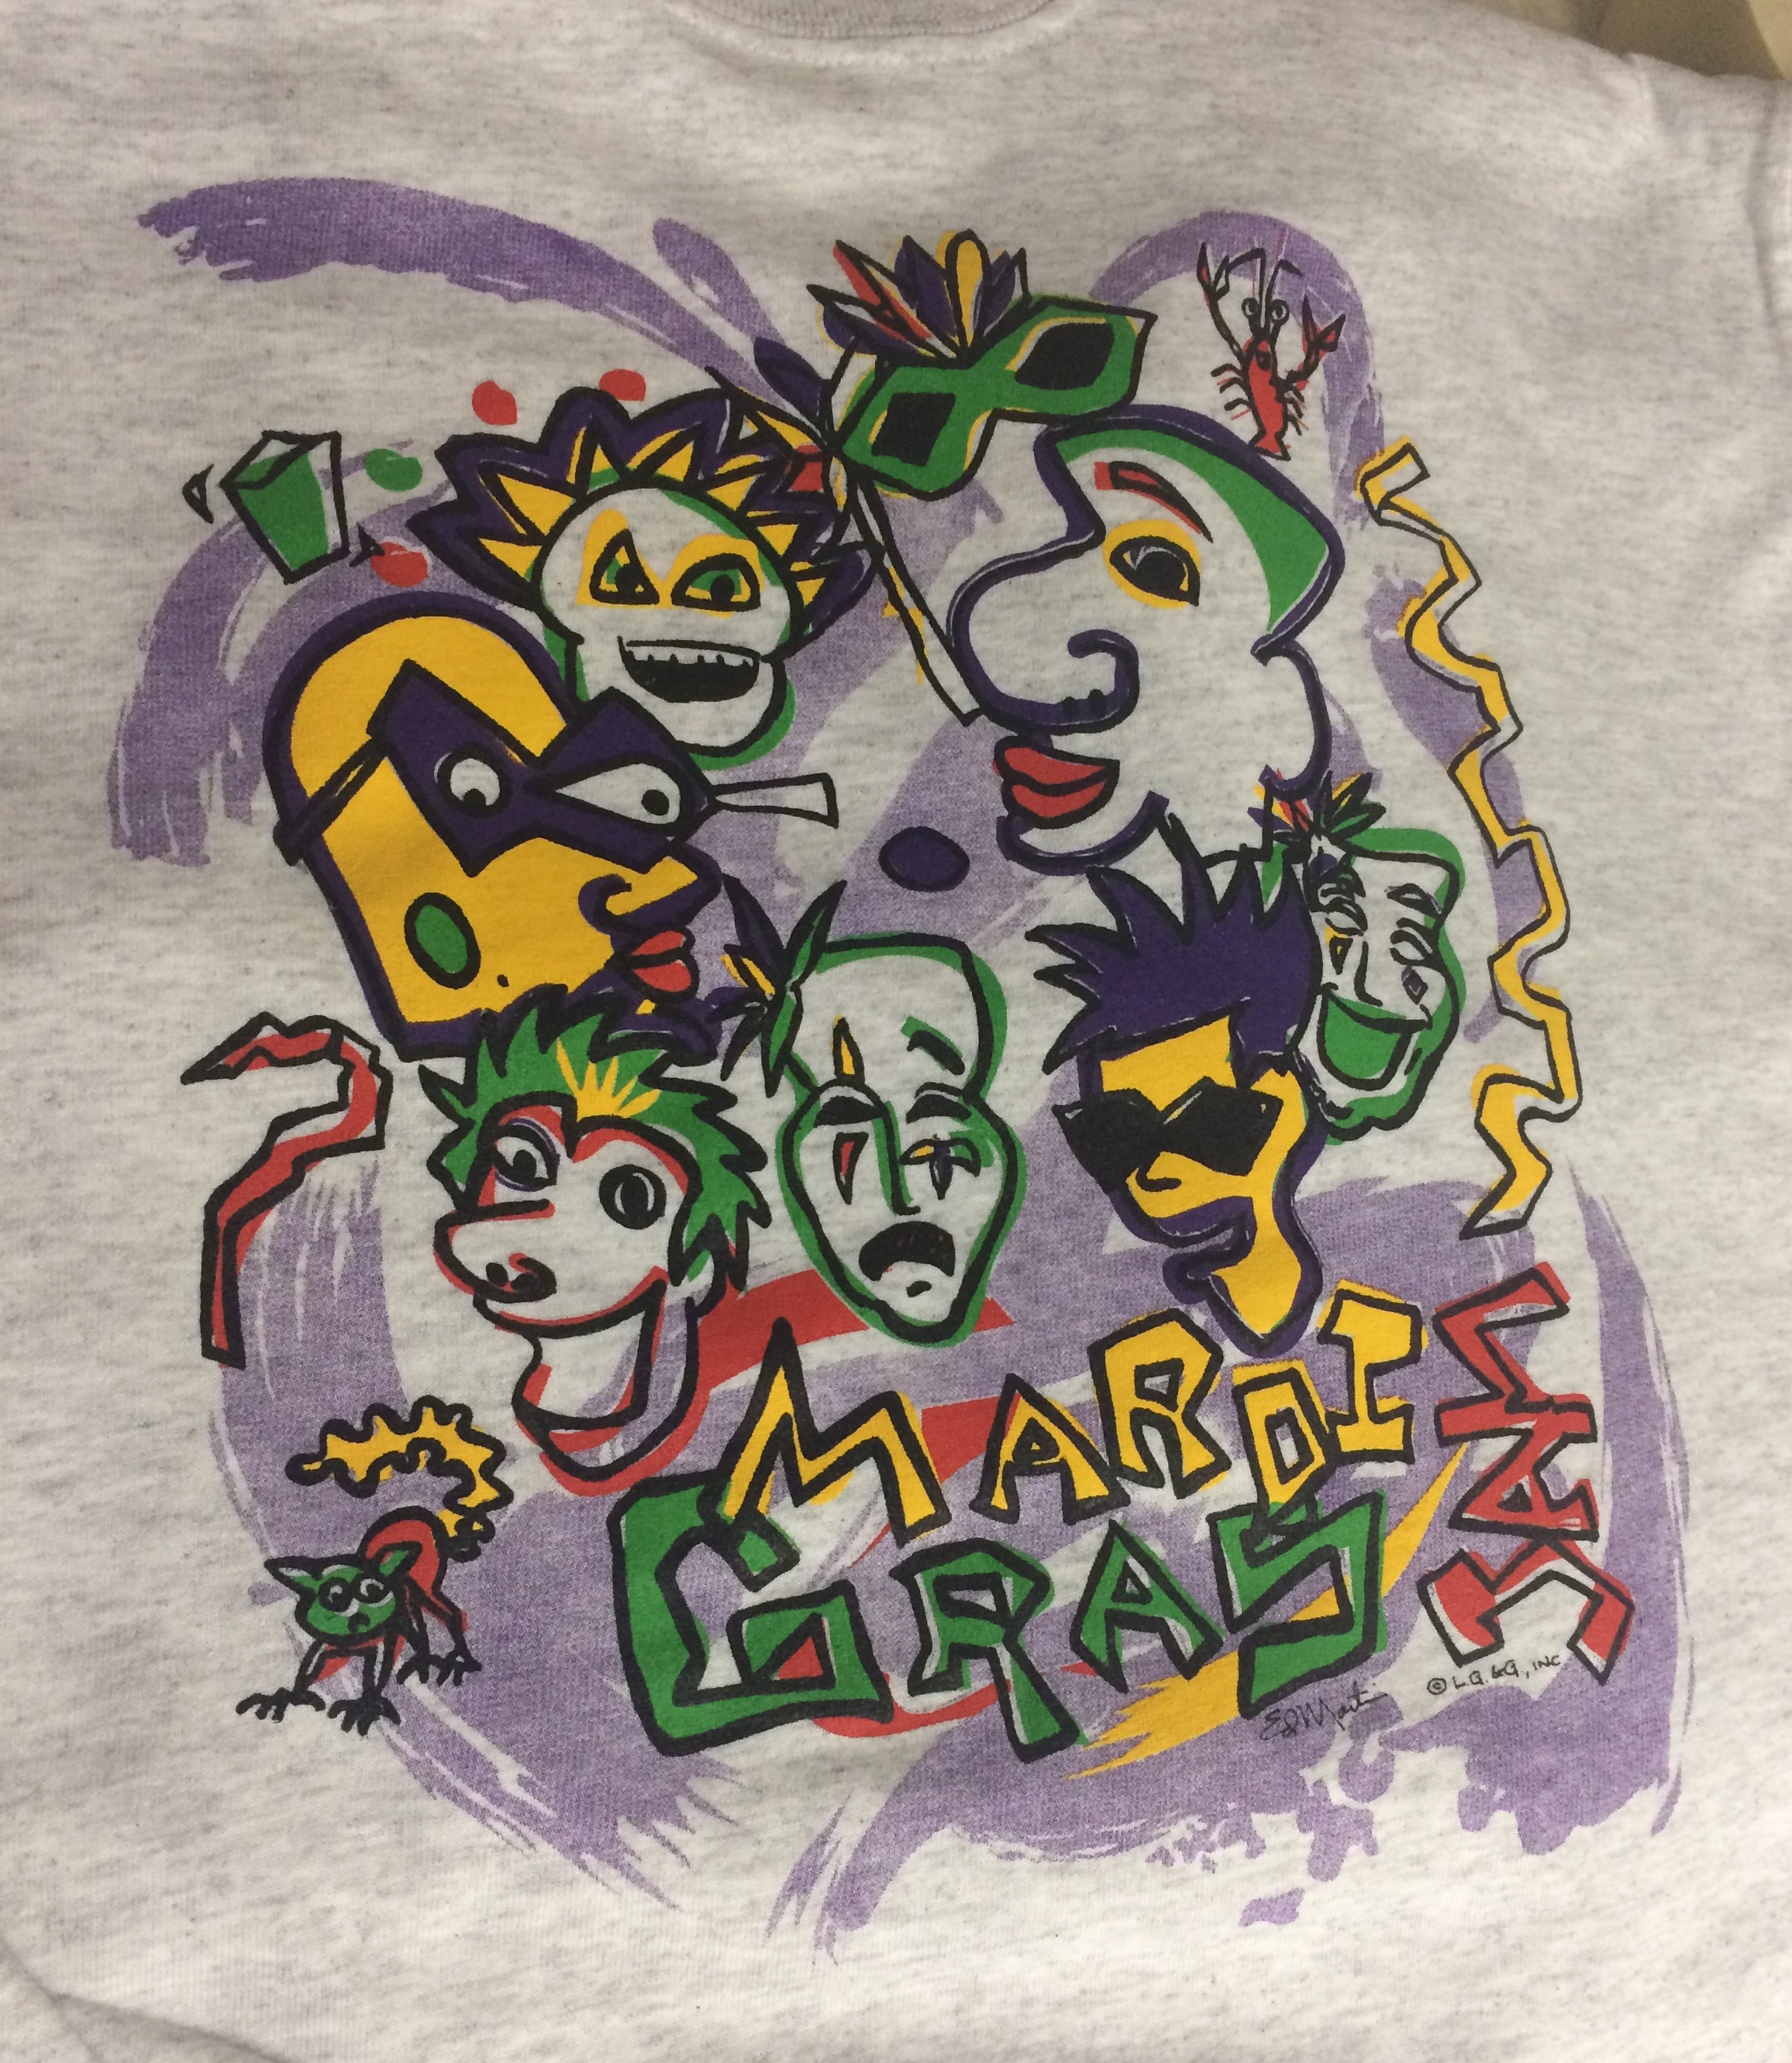 MG Ash Picasso YOUTH tee – Louisiana Gifts & Gallery, INC